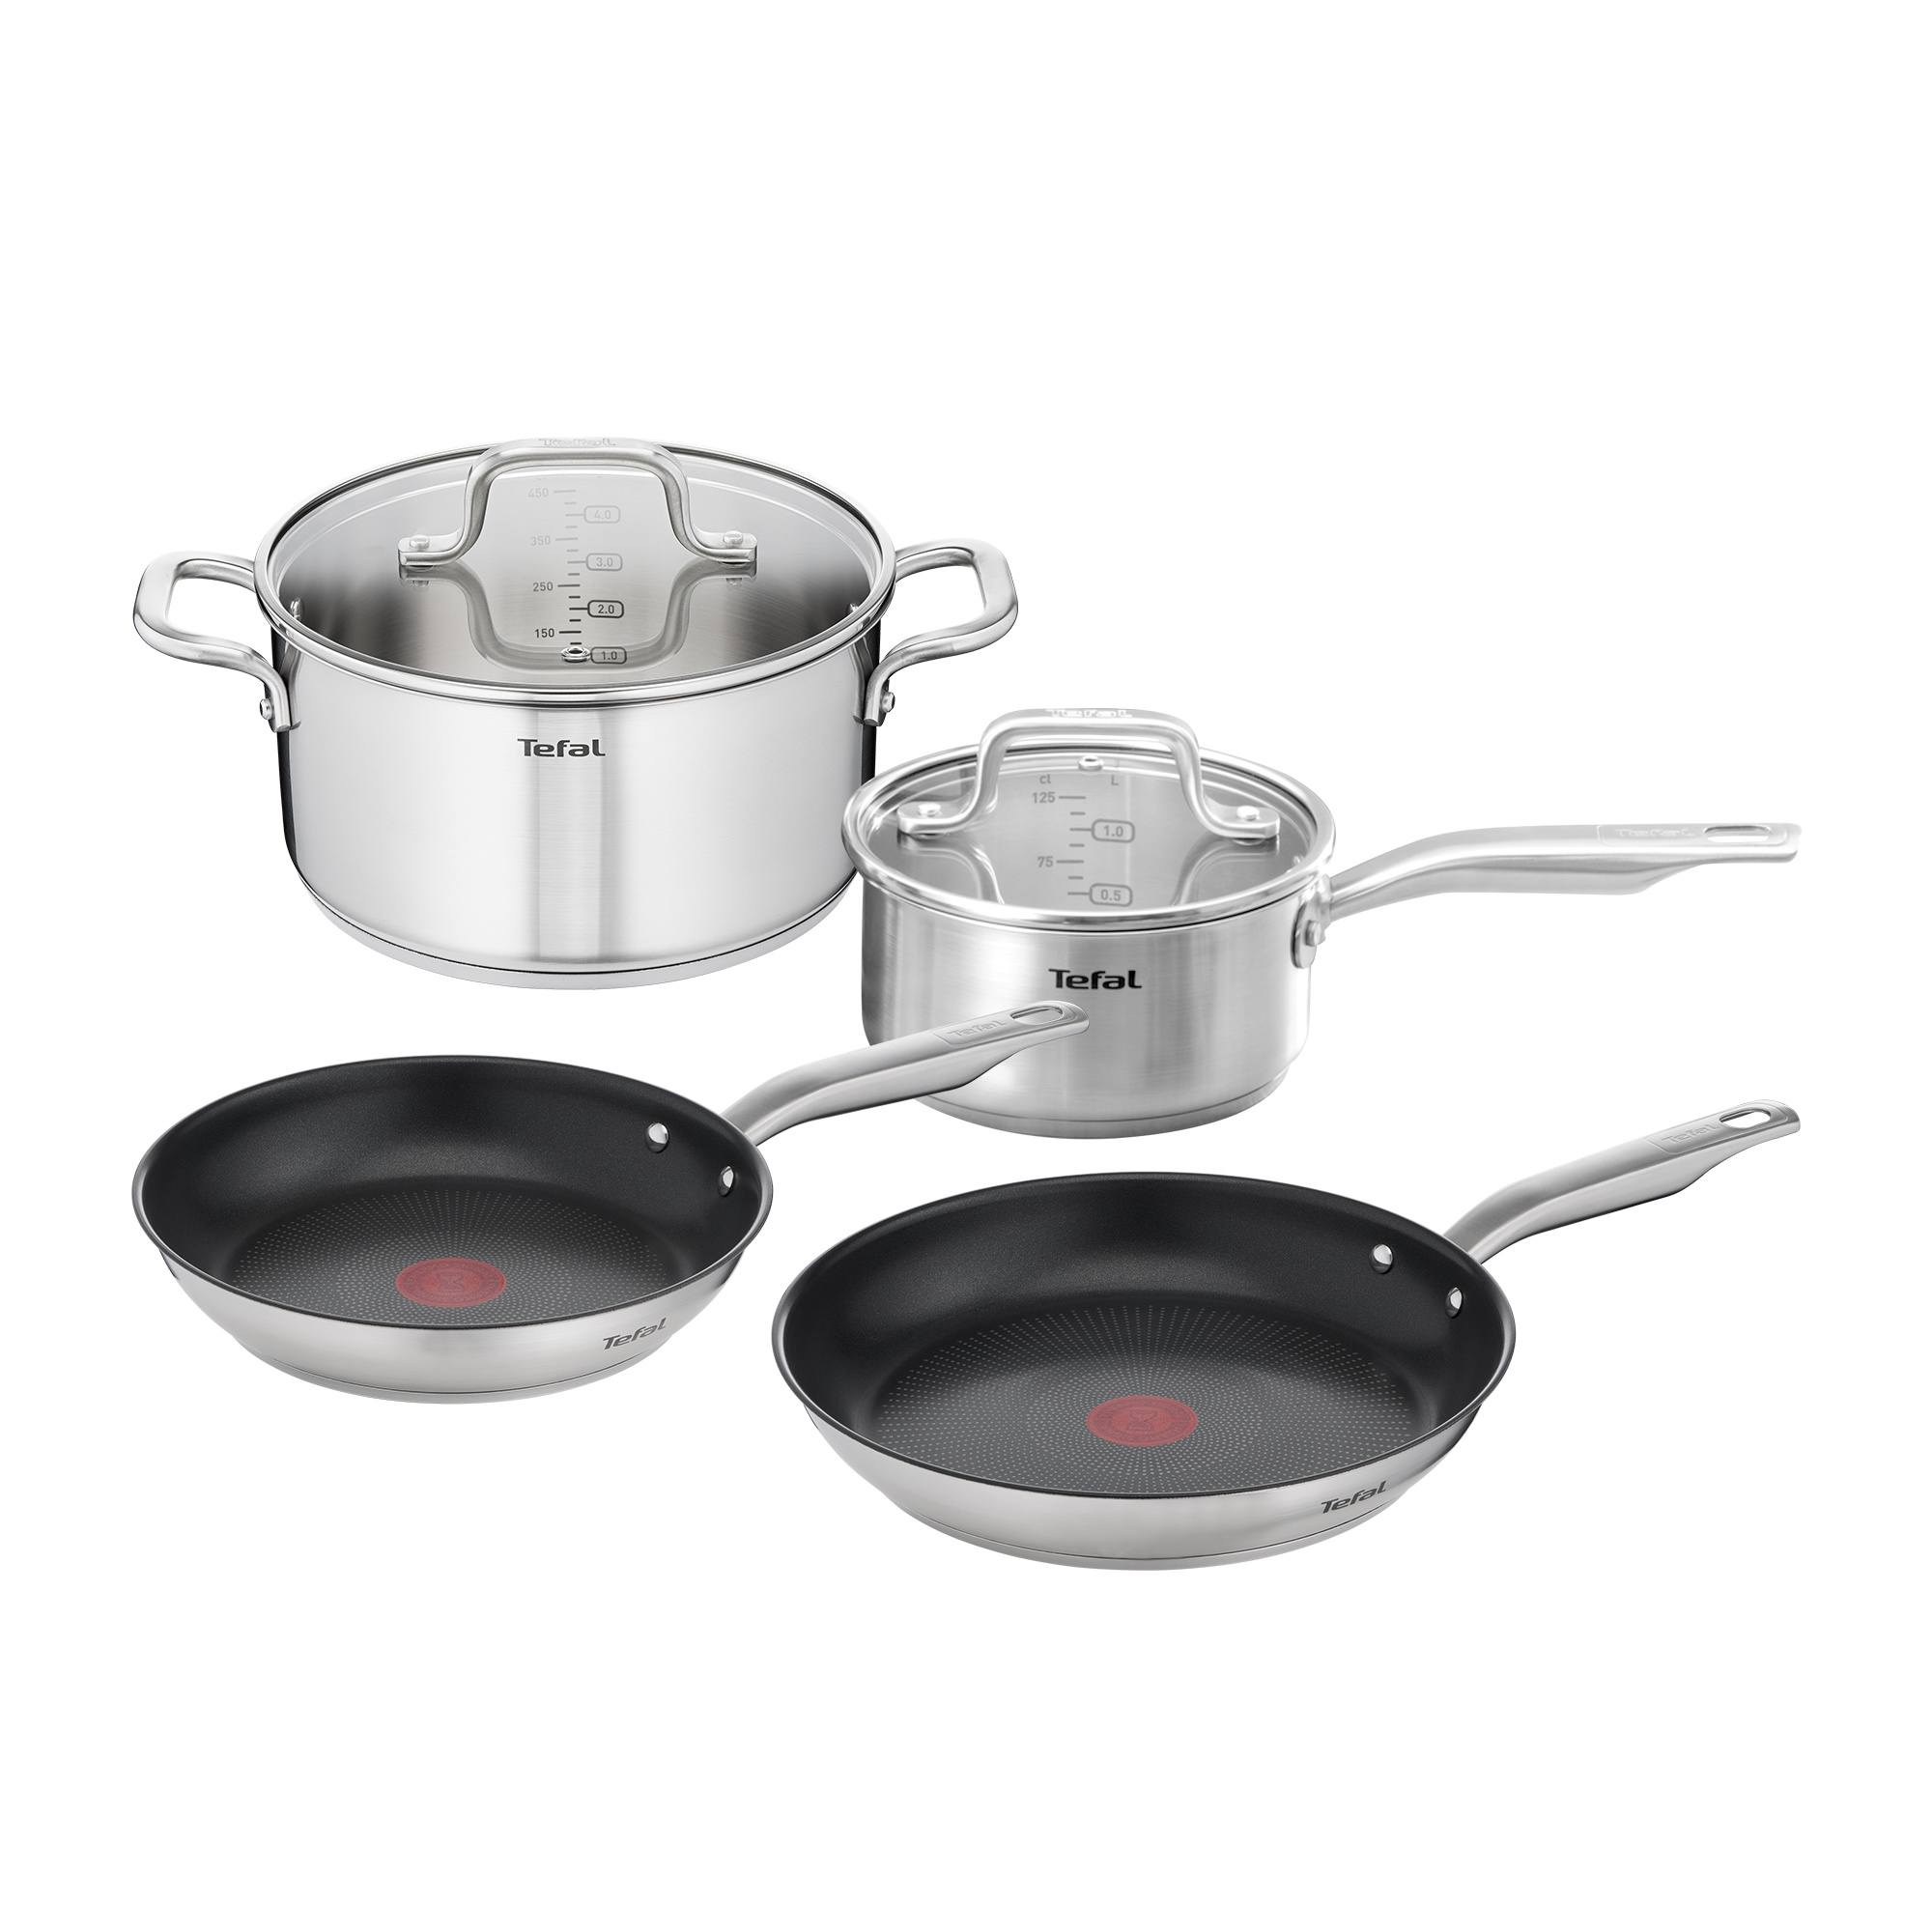 Tefal Virtuoso 4pc Stainless Steel Cookware Set Image 1